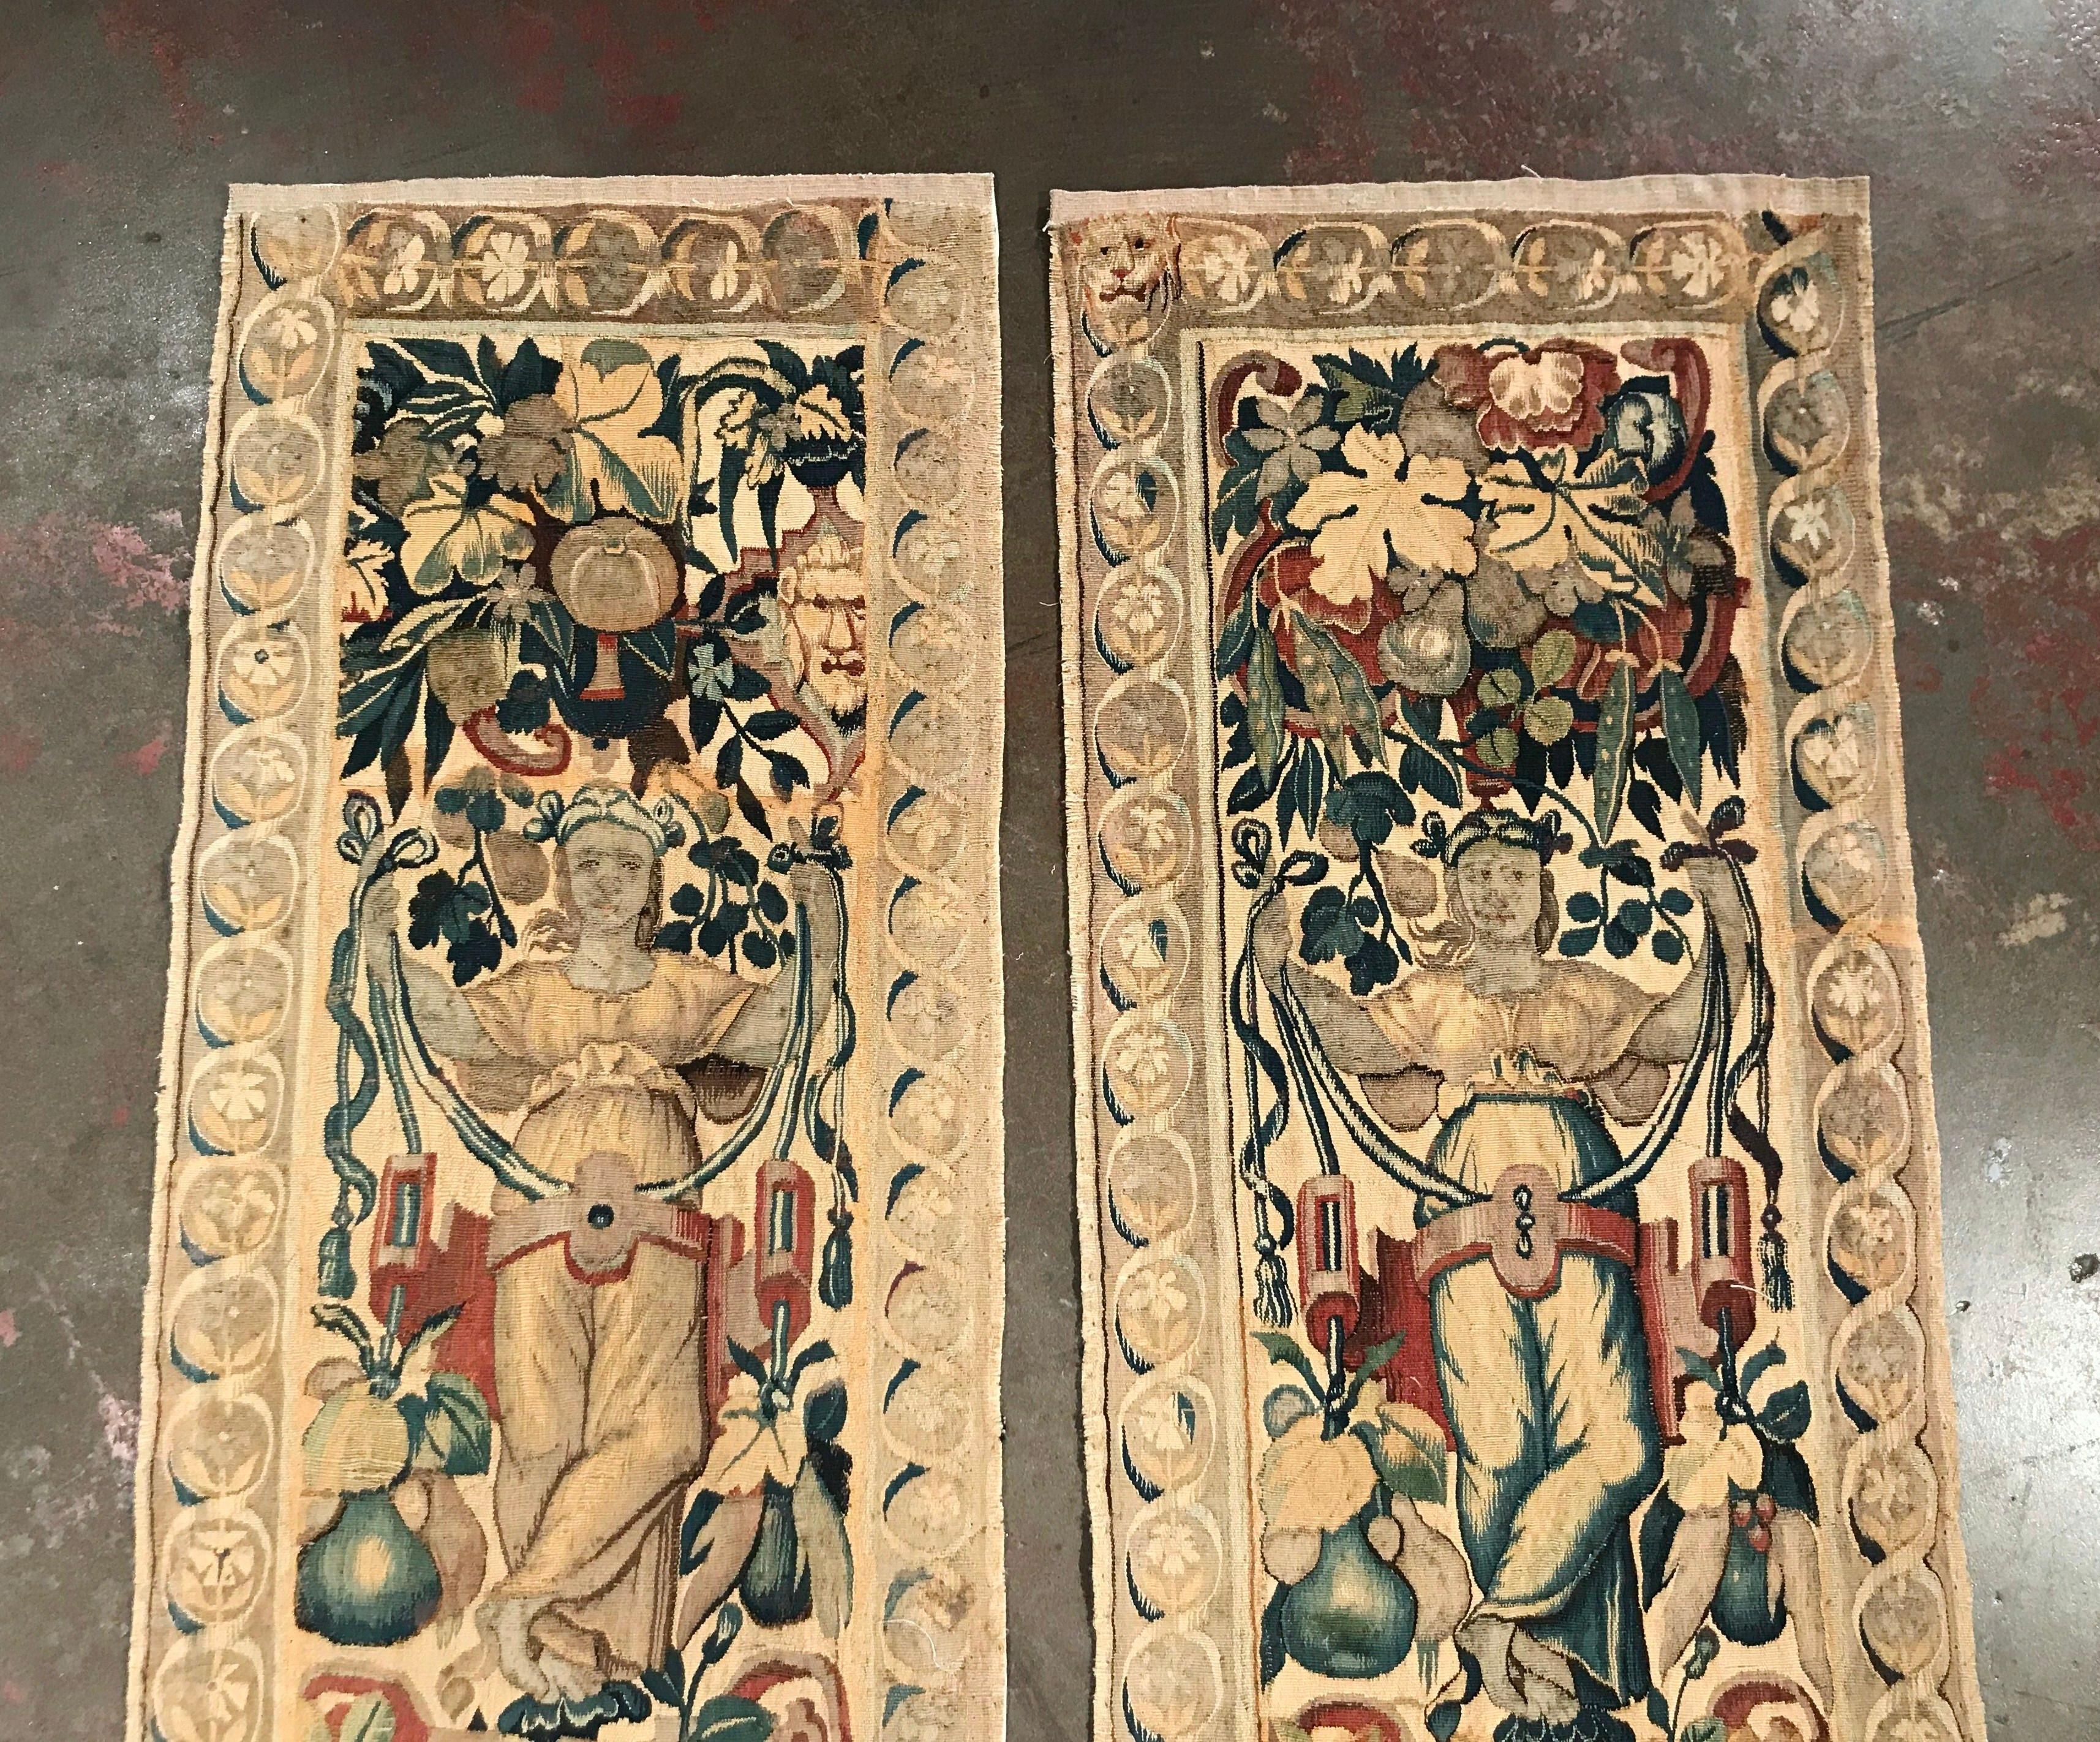 Called portieres, these antique wall hanging tapestries were handwoven in Belgium, circa 1760. They both feature mythological and lion figures flanked by foliage decor in the blue and green palette. Both pieces have a beige border with geometric